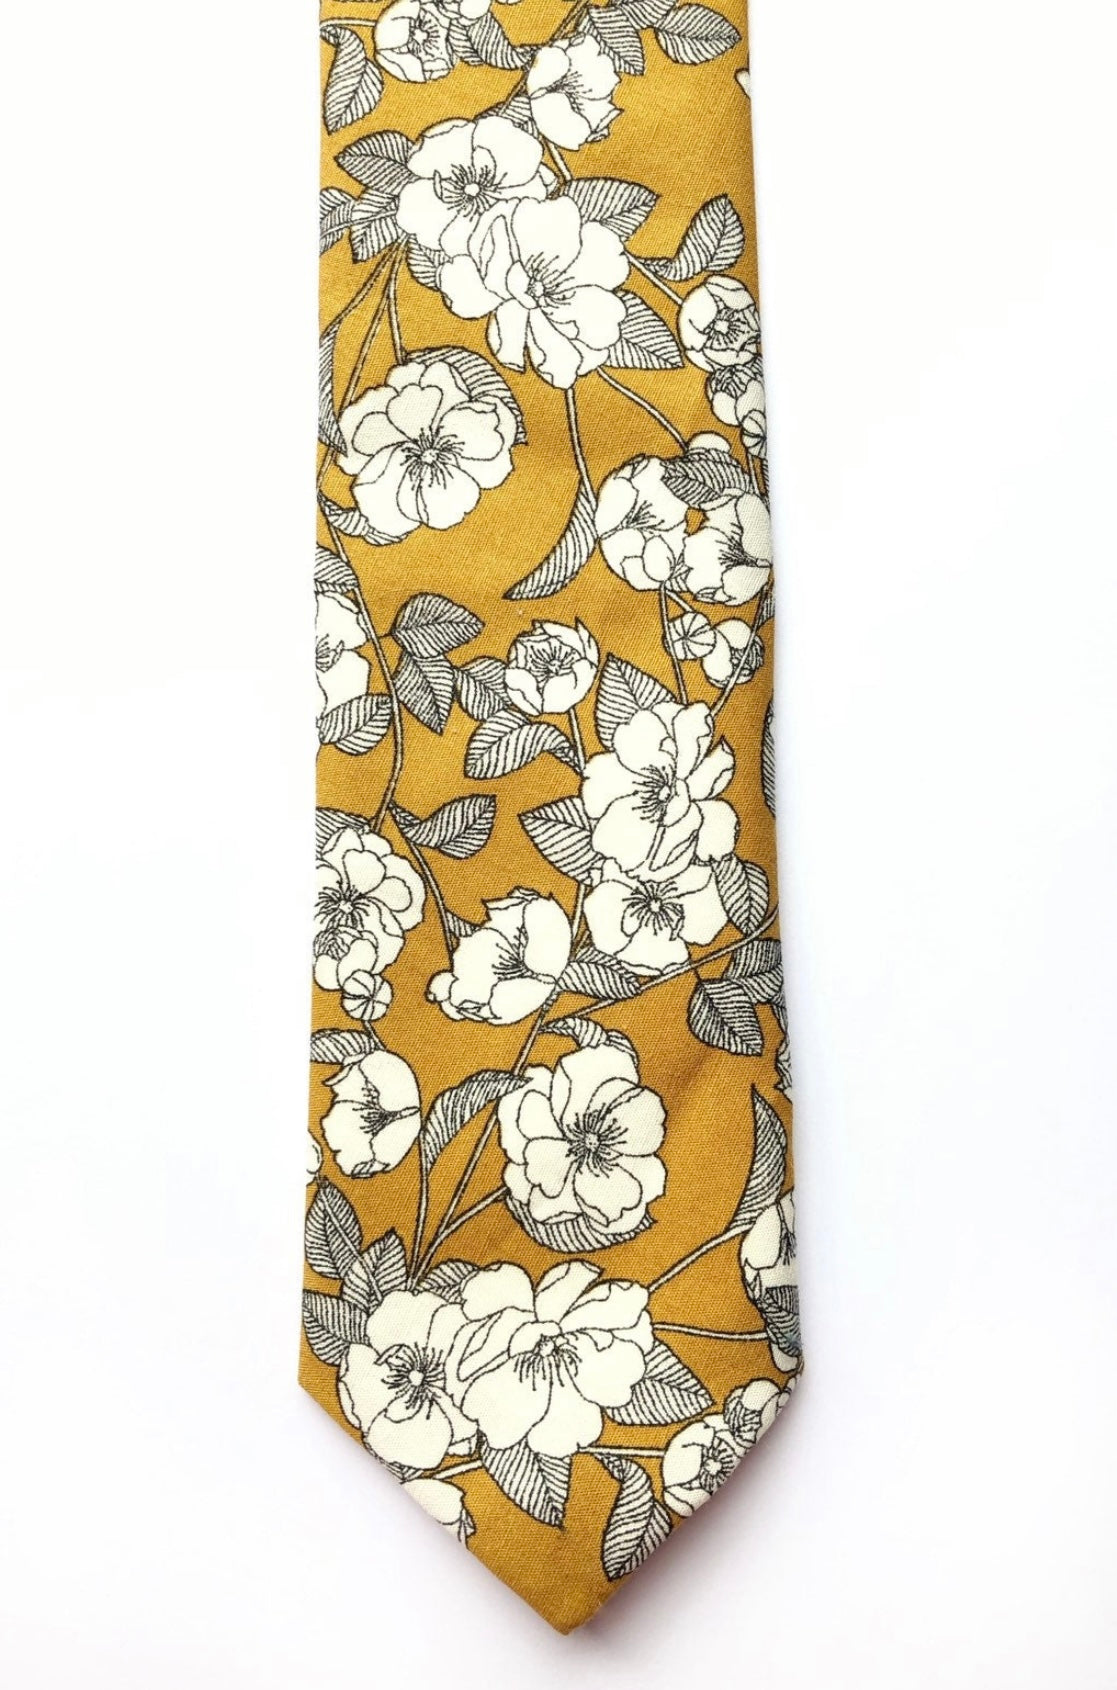 Ties in Mustard Yellow Floral